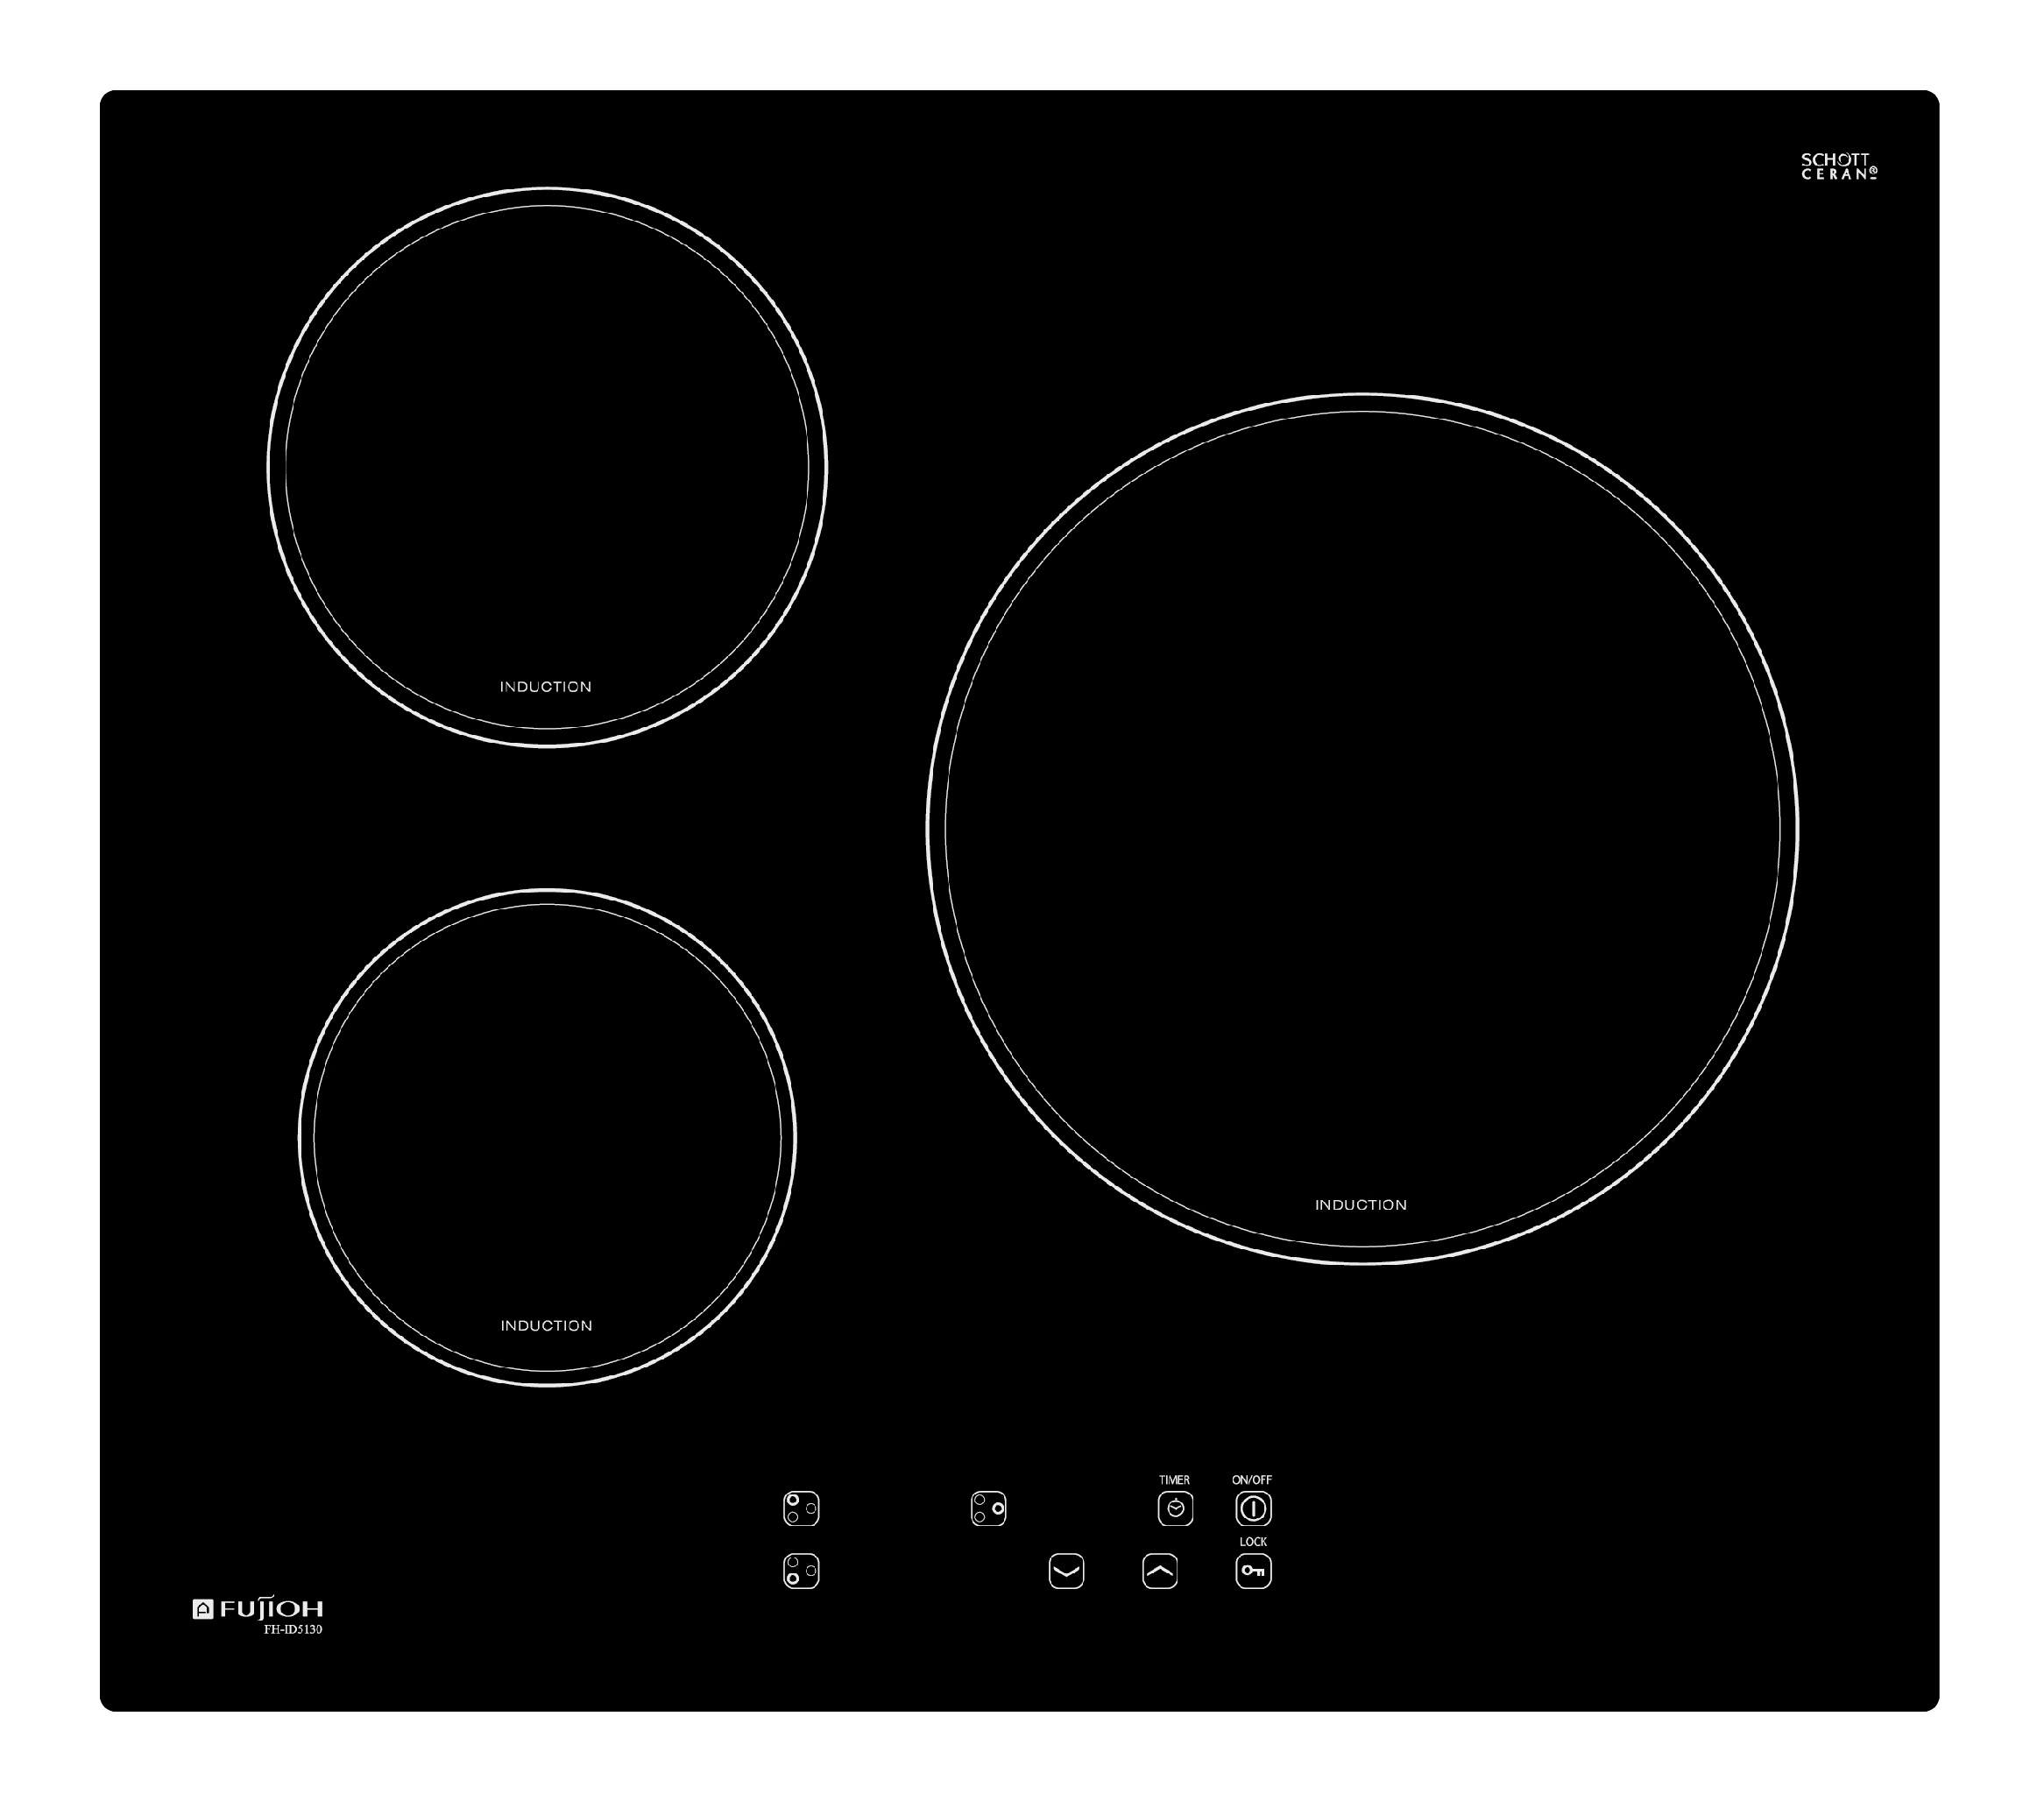 Induction Hob with 3 zones